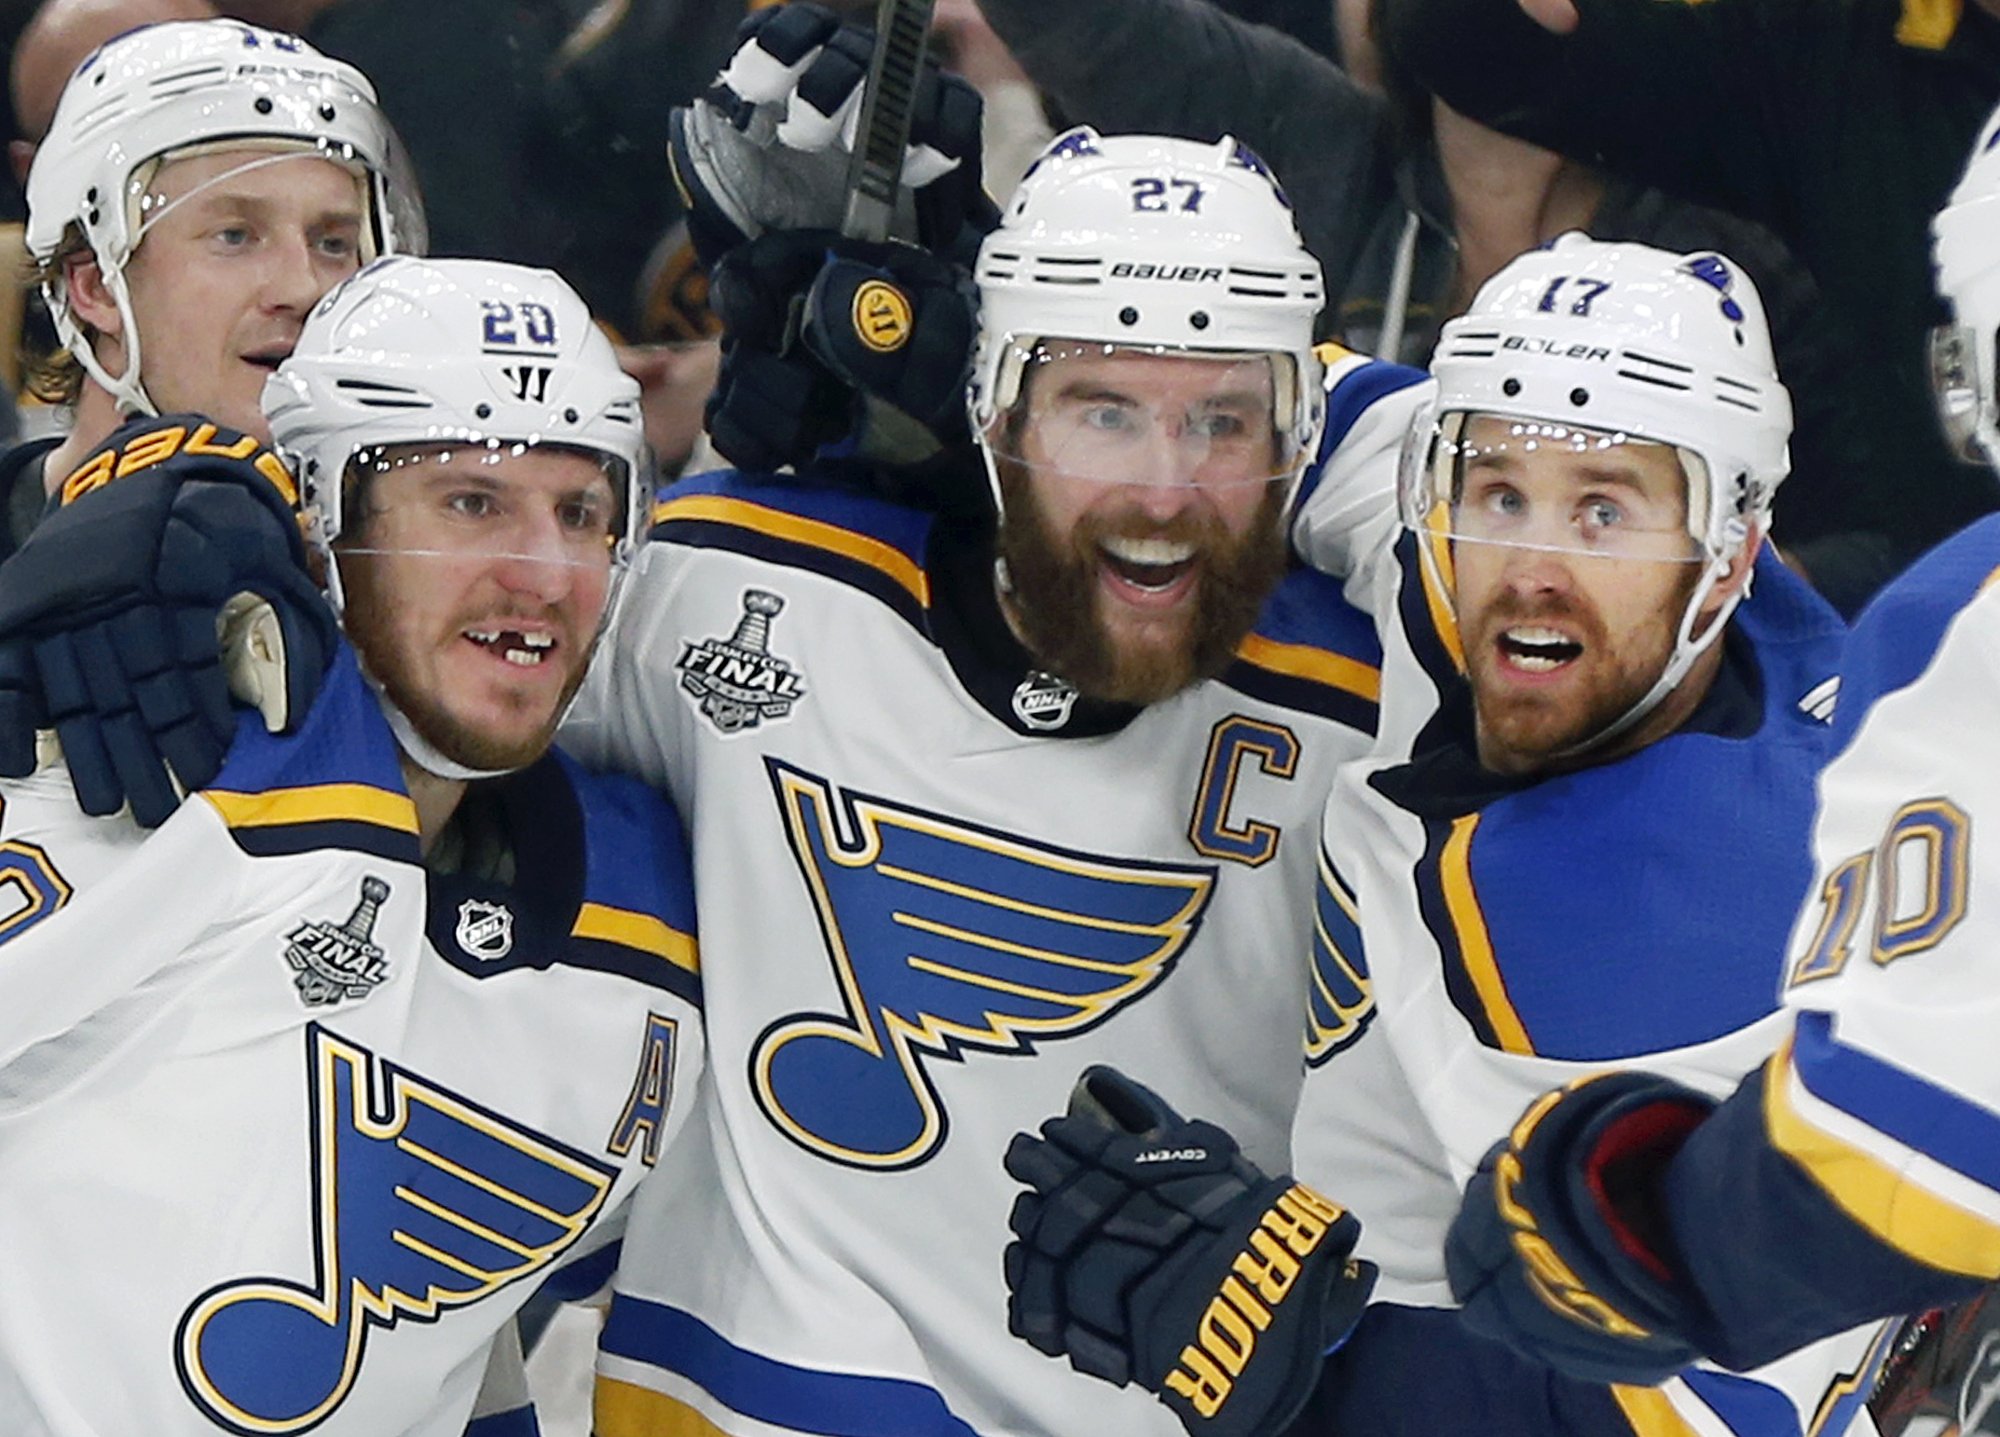 St. Louis Blues raise the Stanley Cup for the first time in